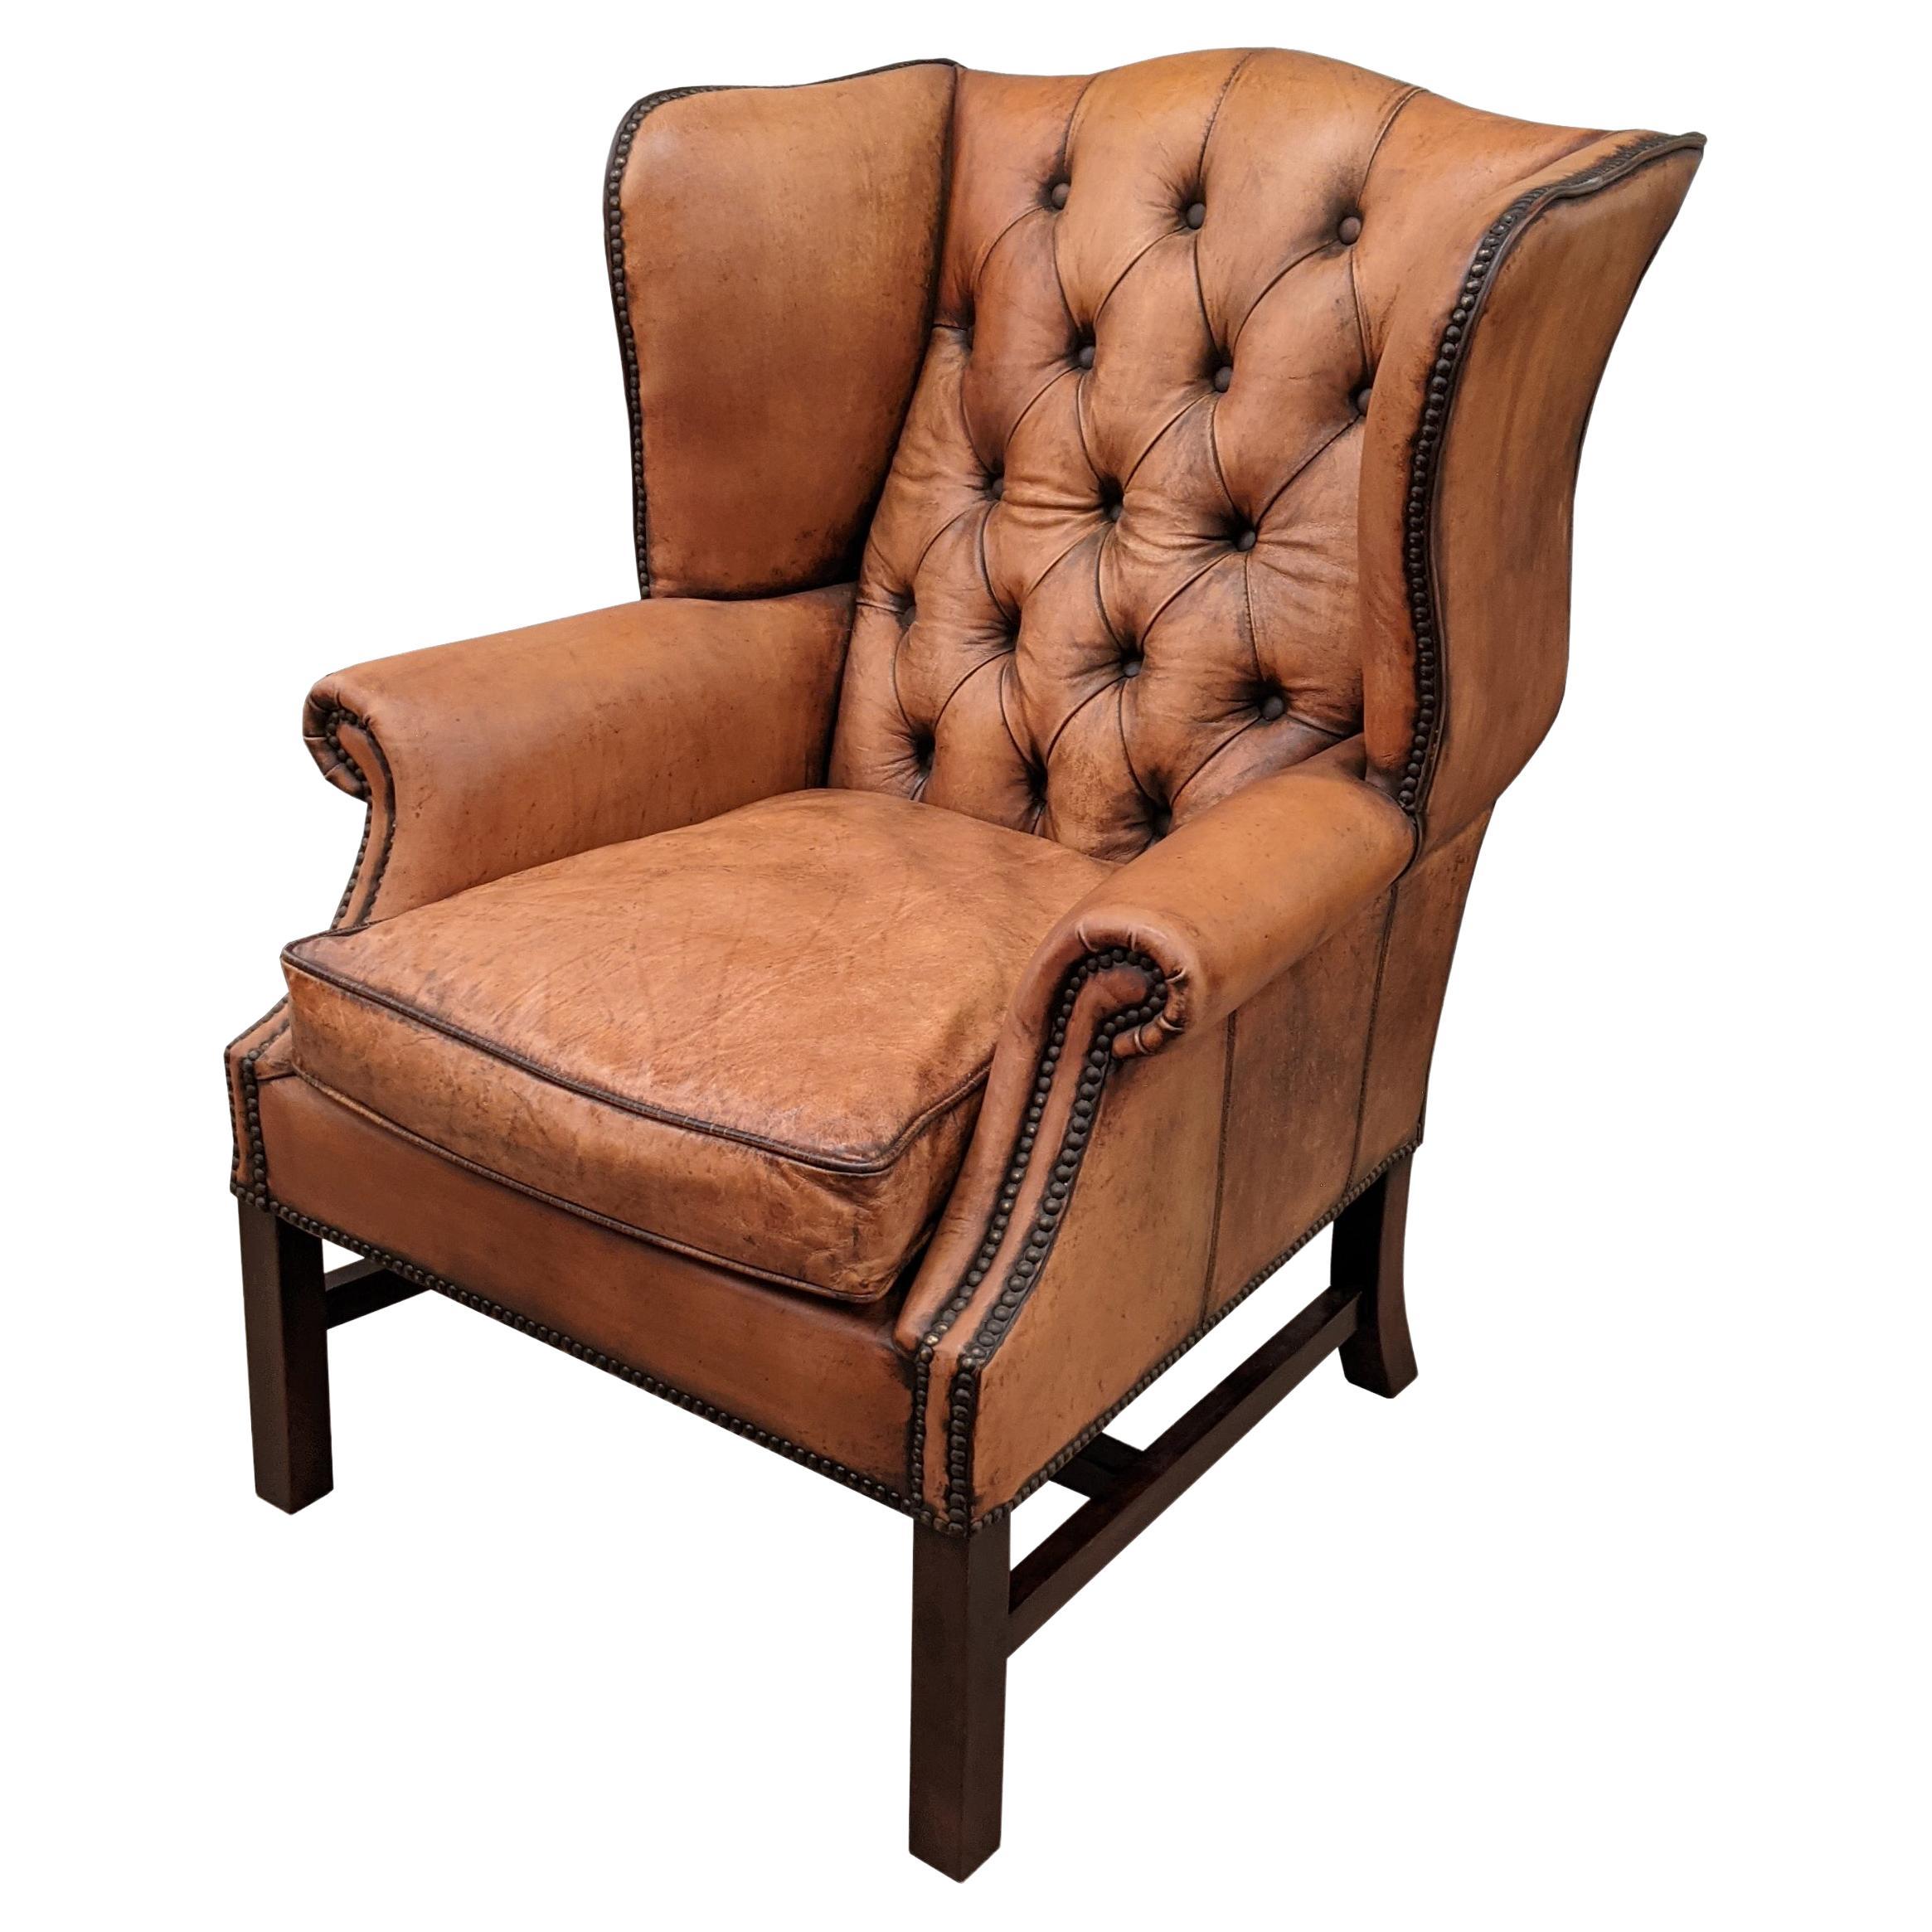 Four English Style wingback Chairs with Tufted Back, Hand Distressed Leather For Sale